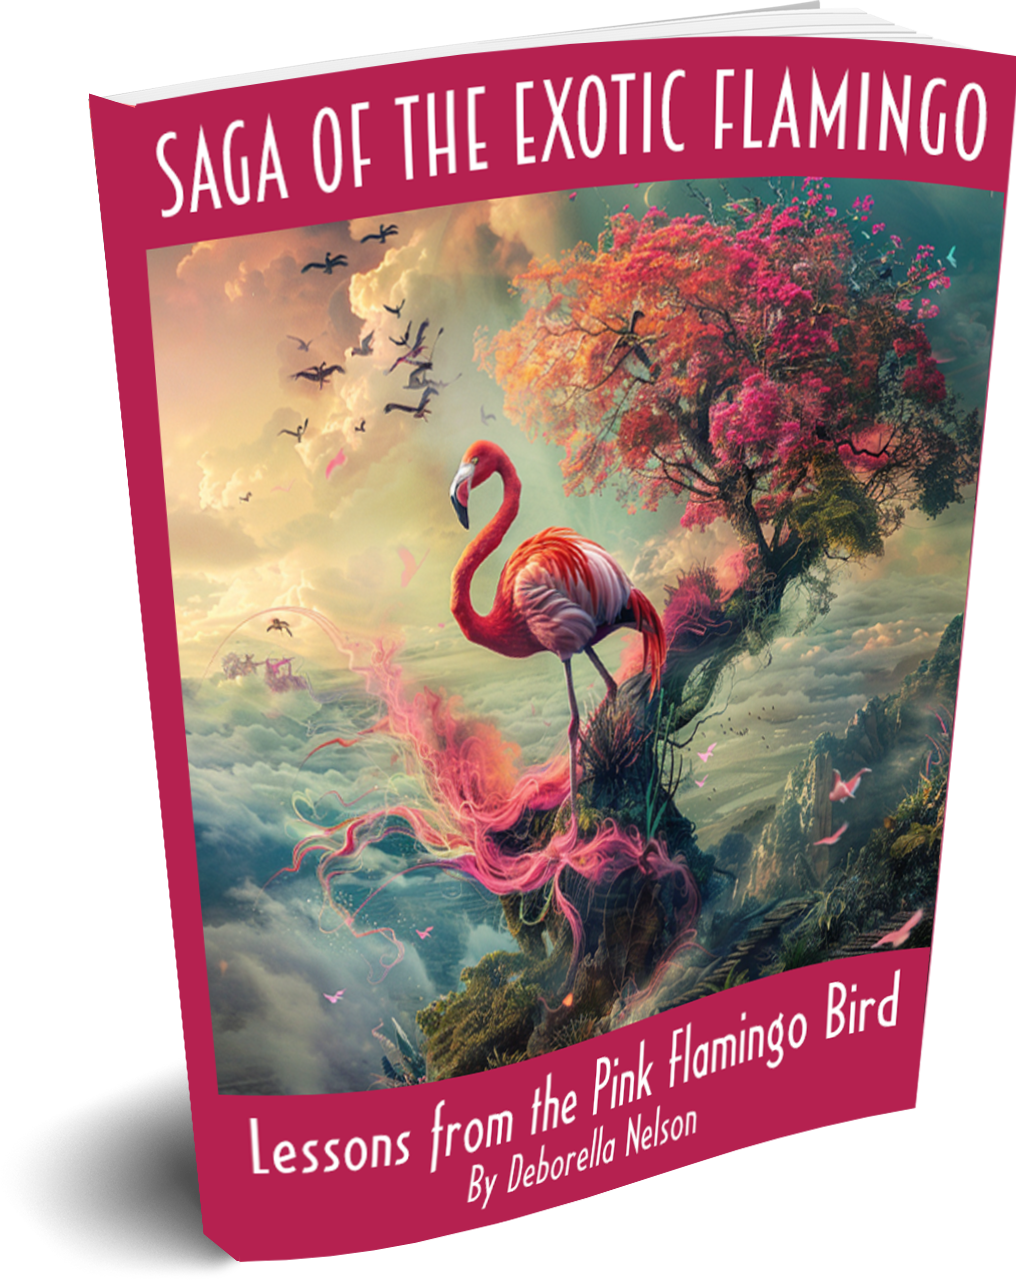 Saga of the Exotic Flamingo—Lessons from the Pink Flamingo Bird